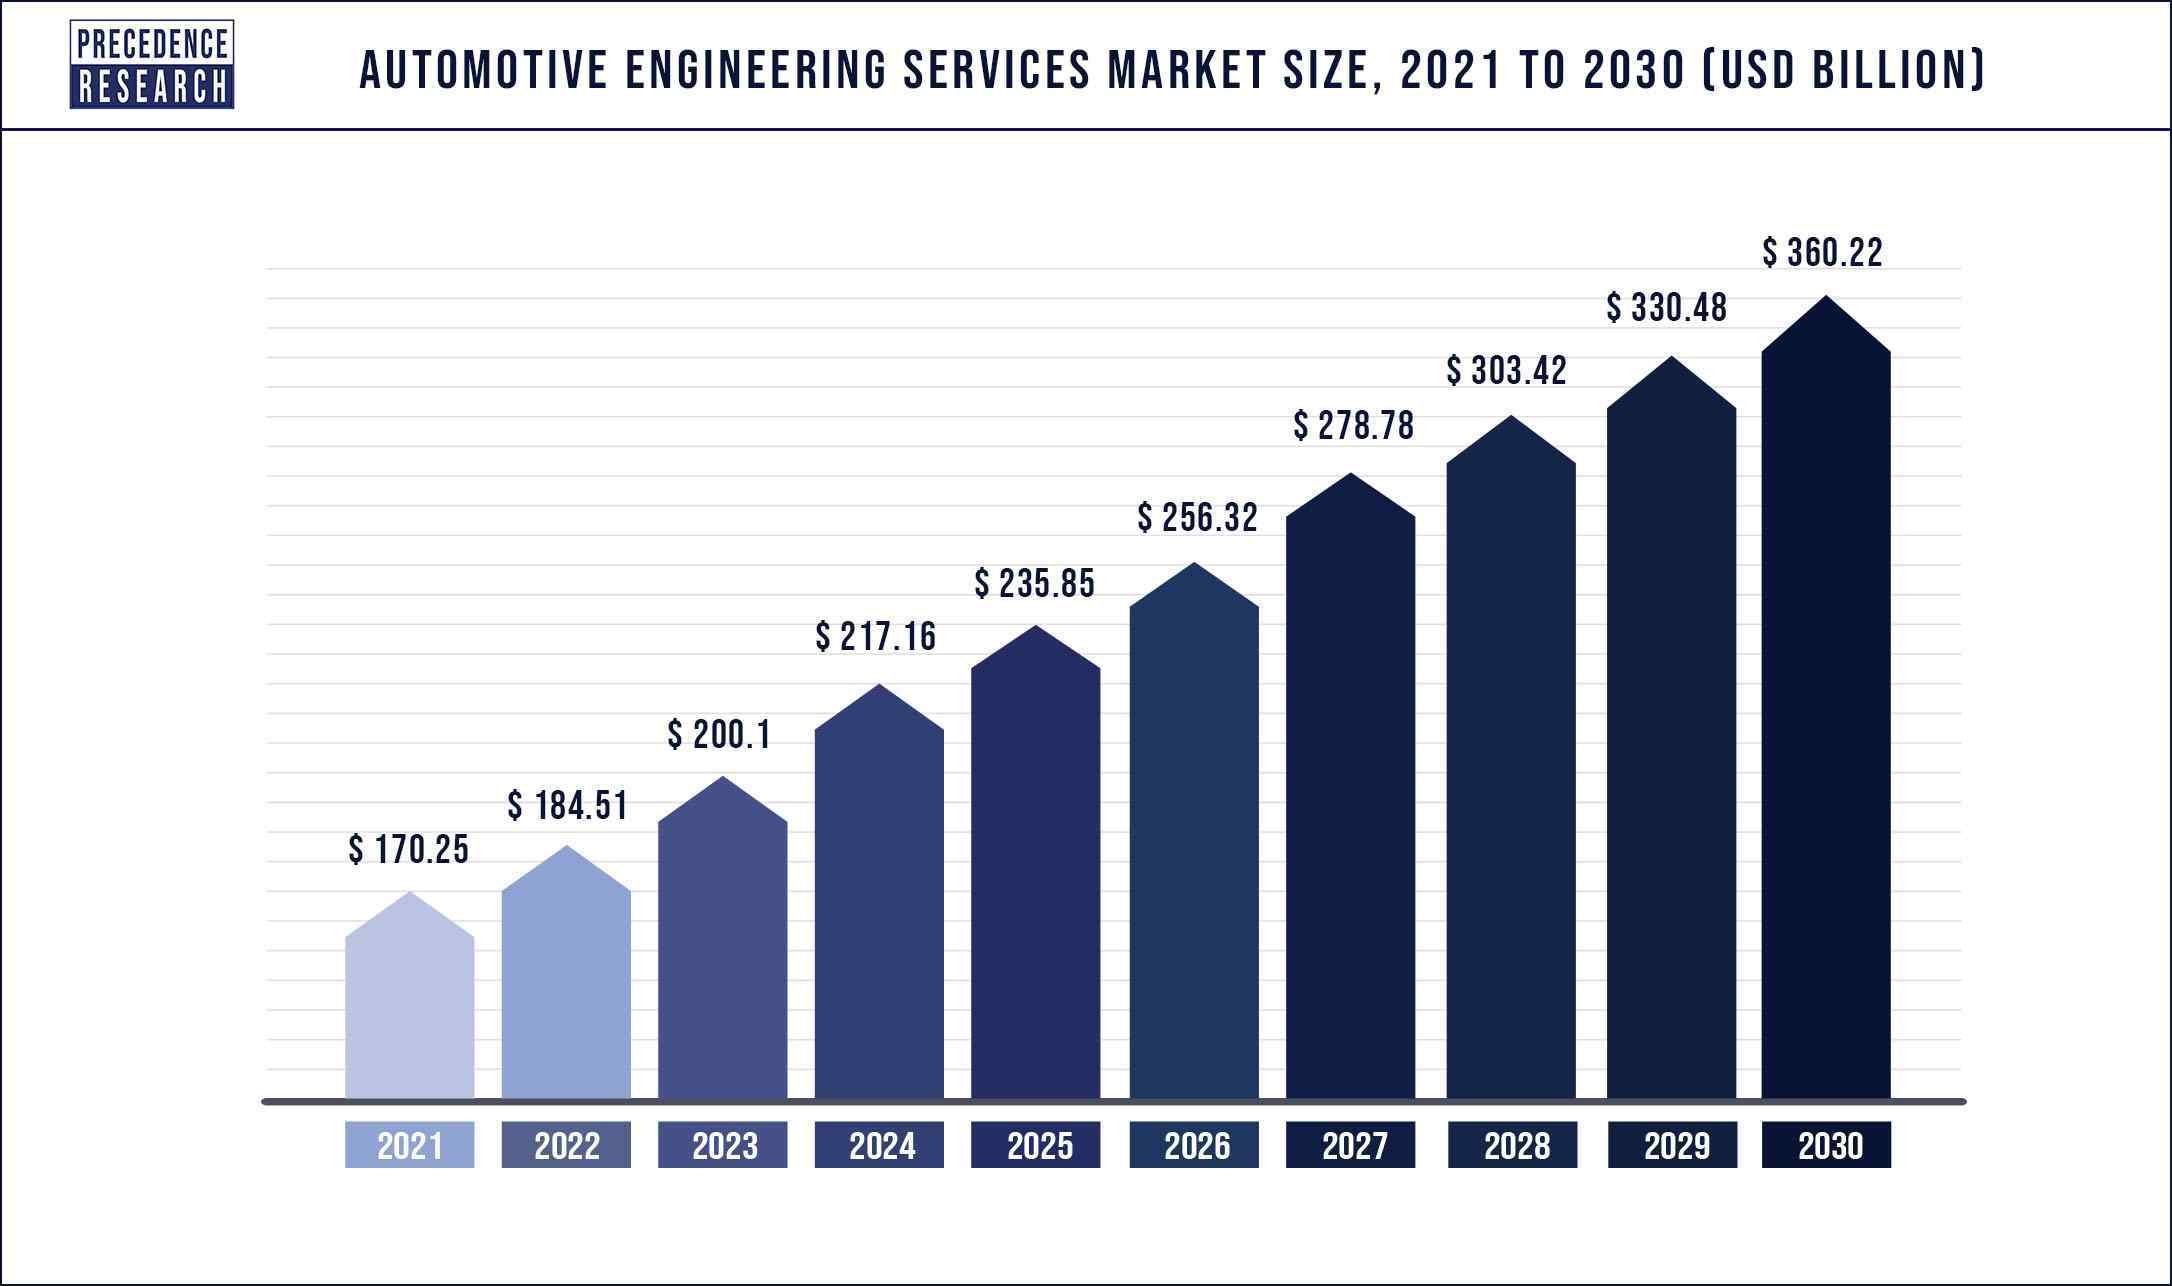 Automotive Engineering Services Market Size, 2021 To 2030 